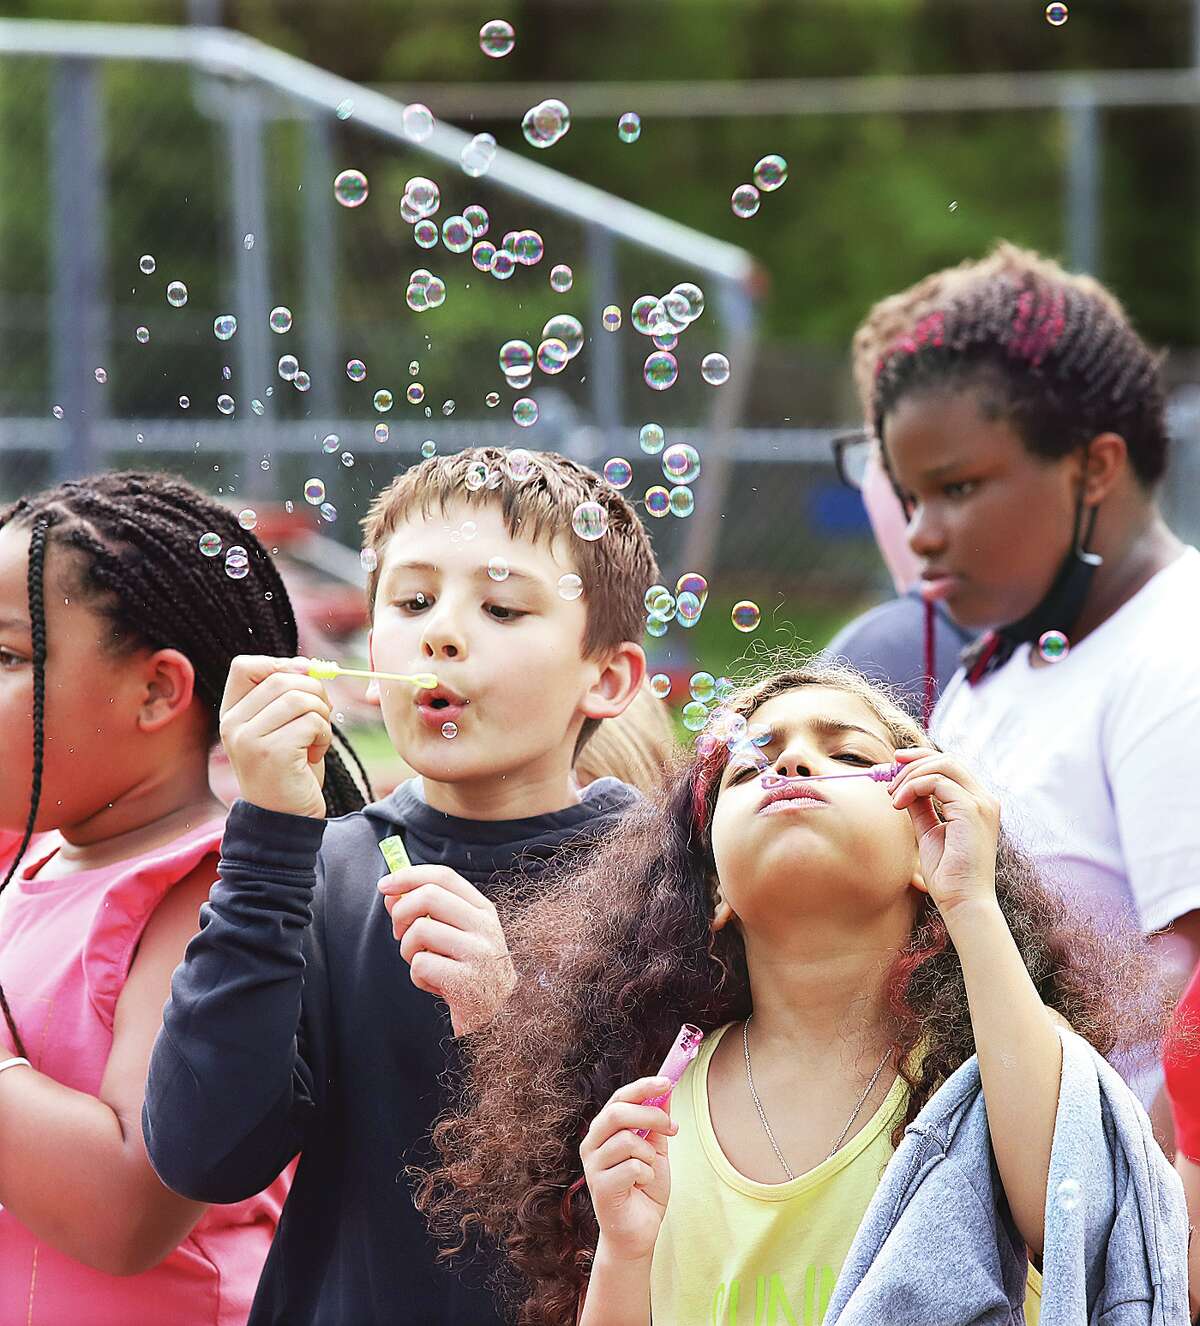 Students blew bubbles to celebrate after the ribbon was cut to open their new outdoor classroom Friday at East Elementary School in Alton.